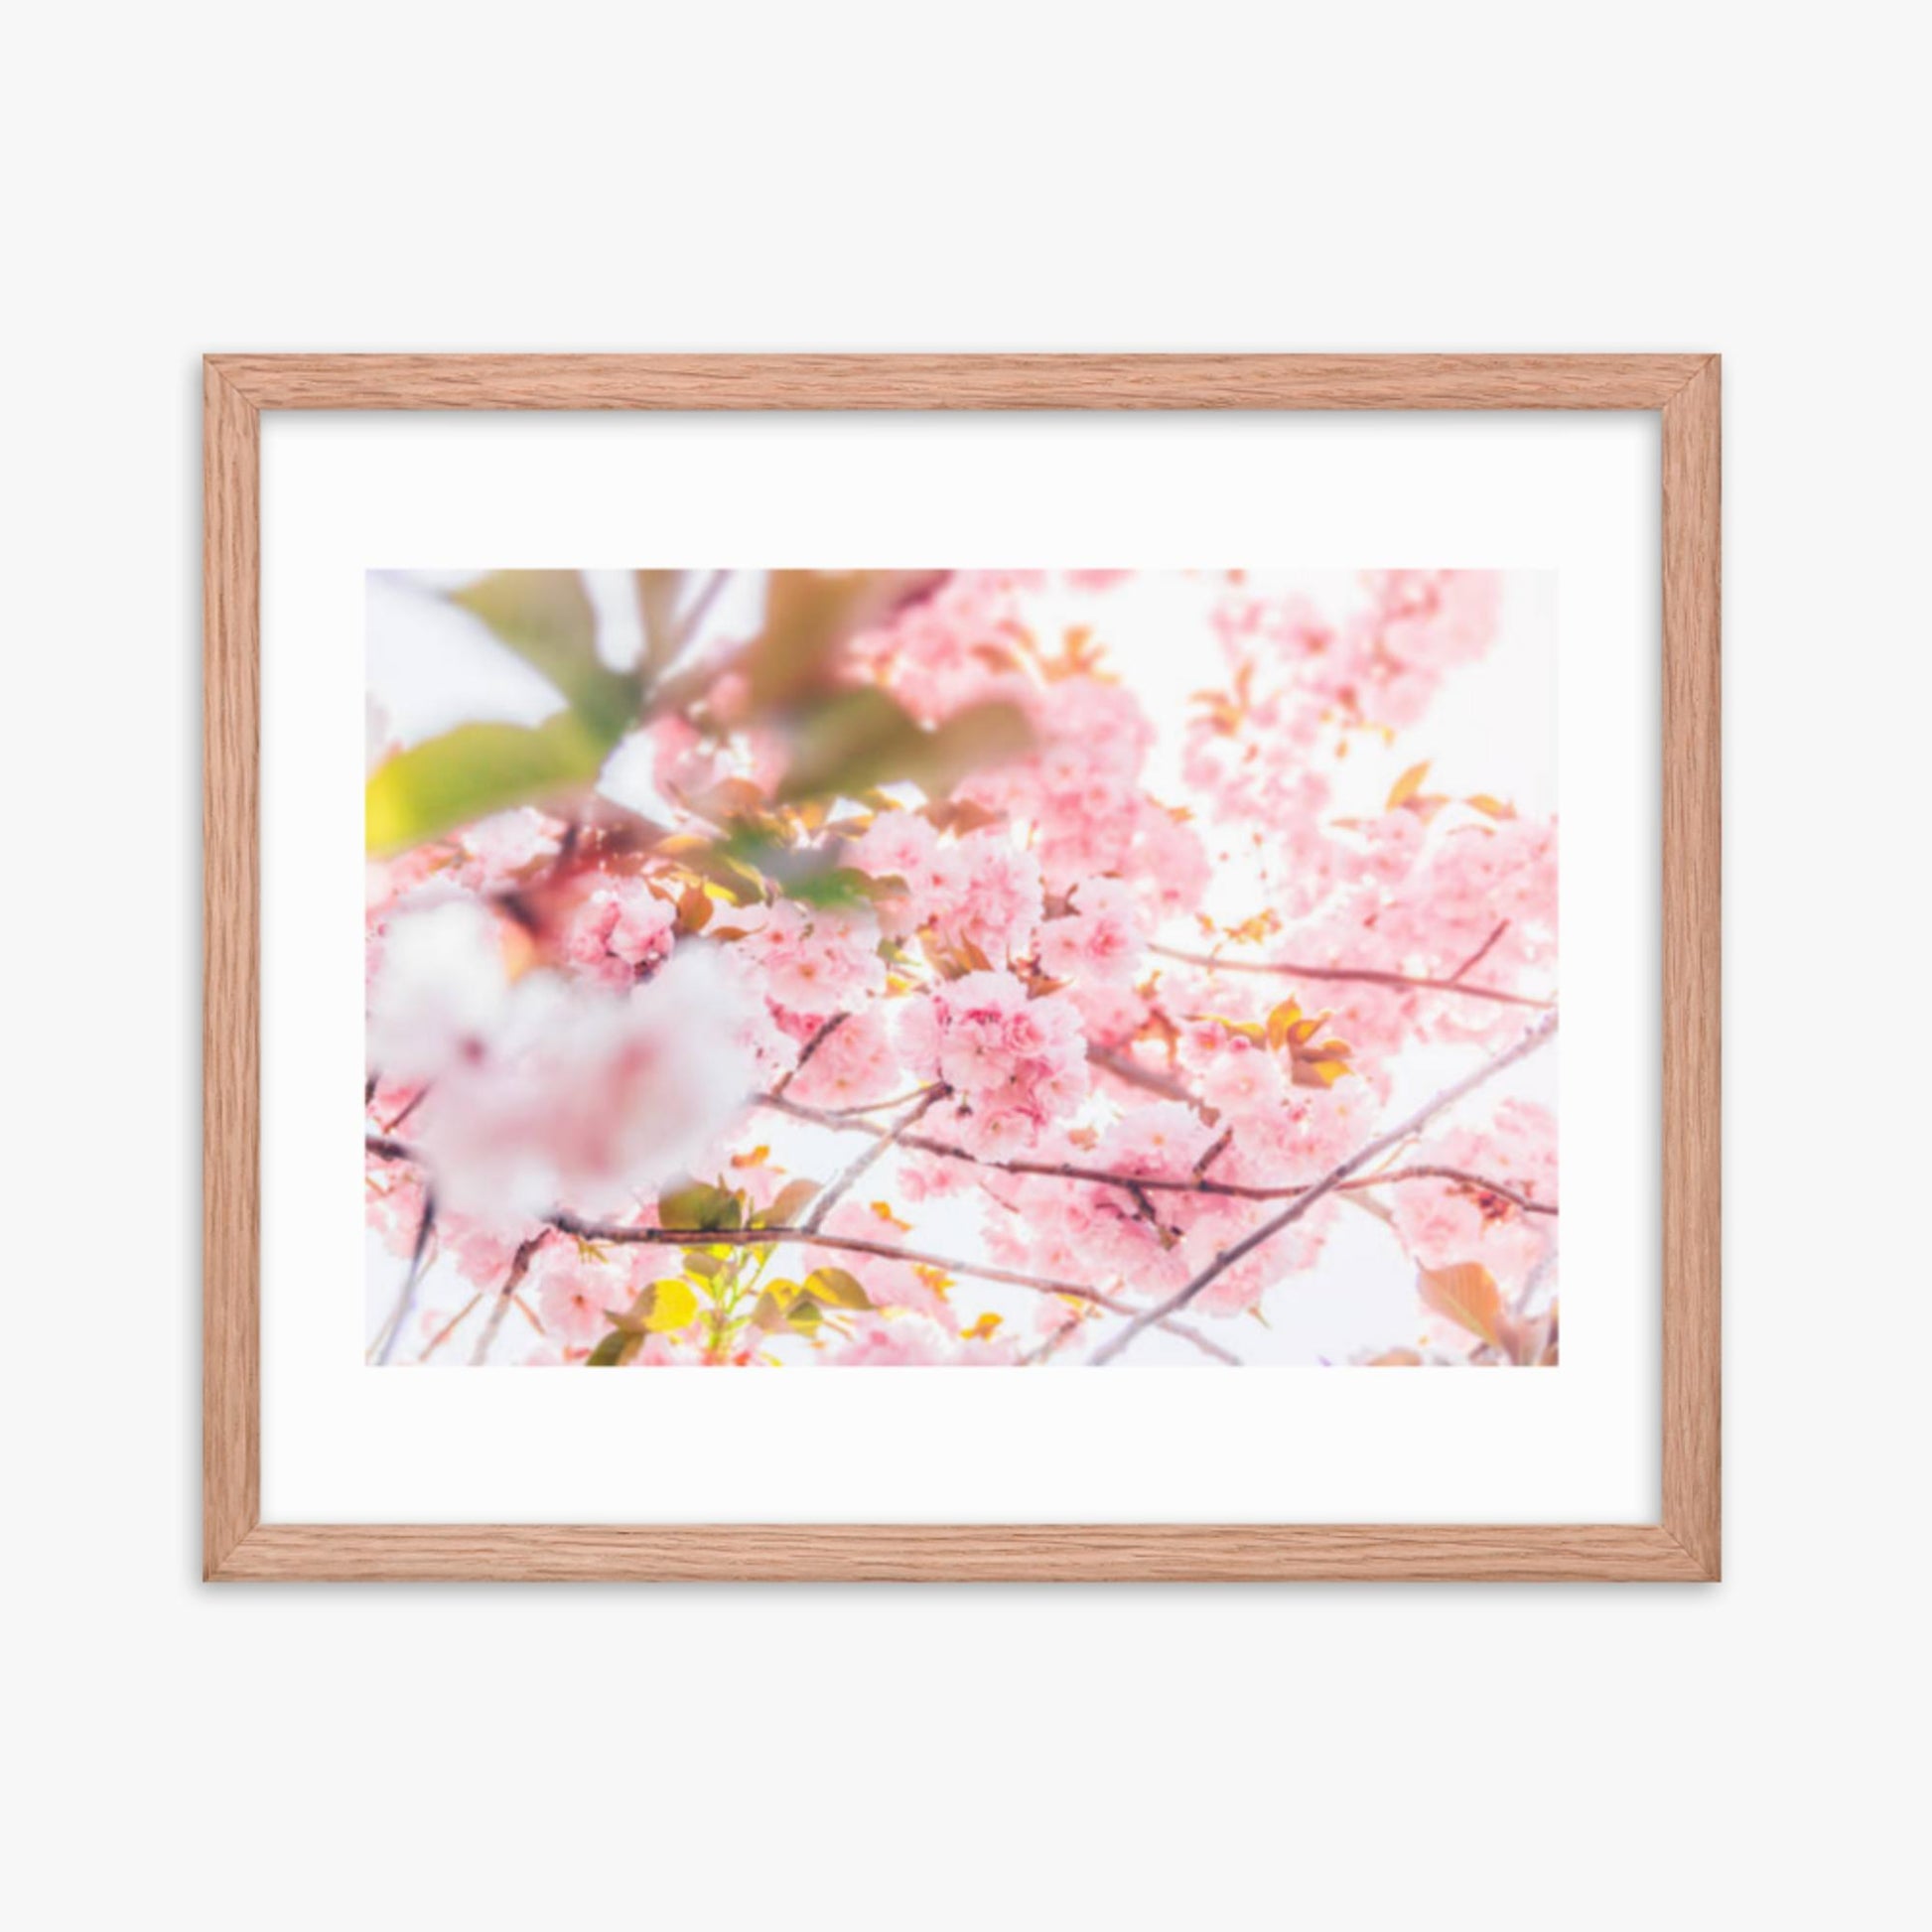 Cherry blossom flowers and sunshine 16x20 in Poster With Oak Frame